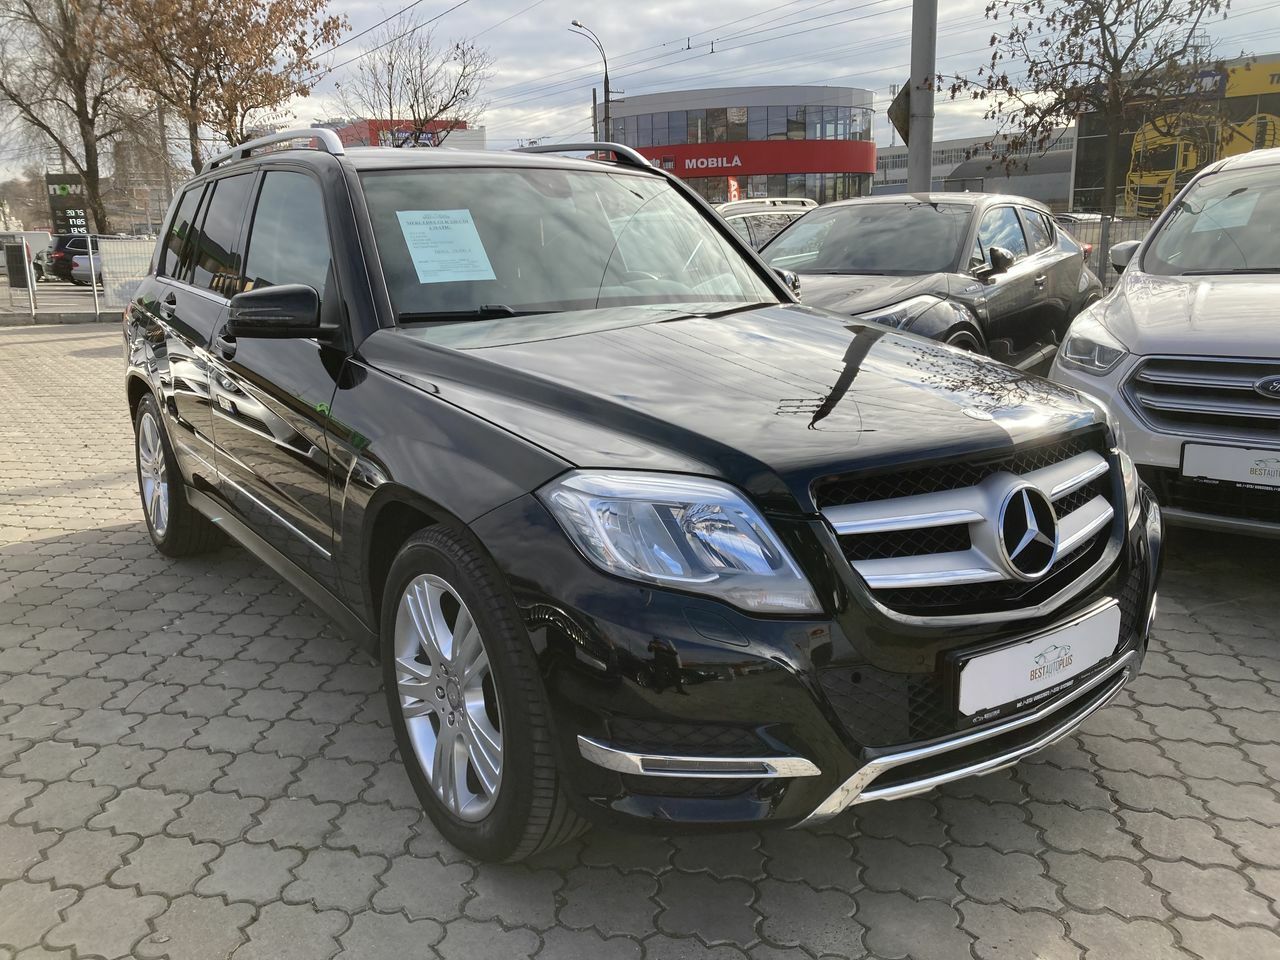 <span style="font-weight: bold;">mercedes glk class</span>